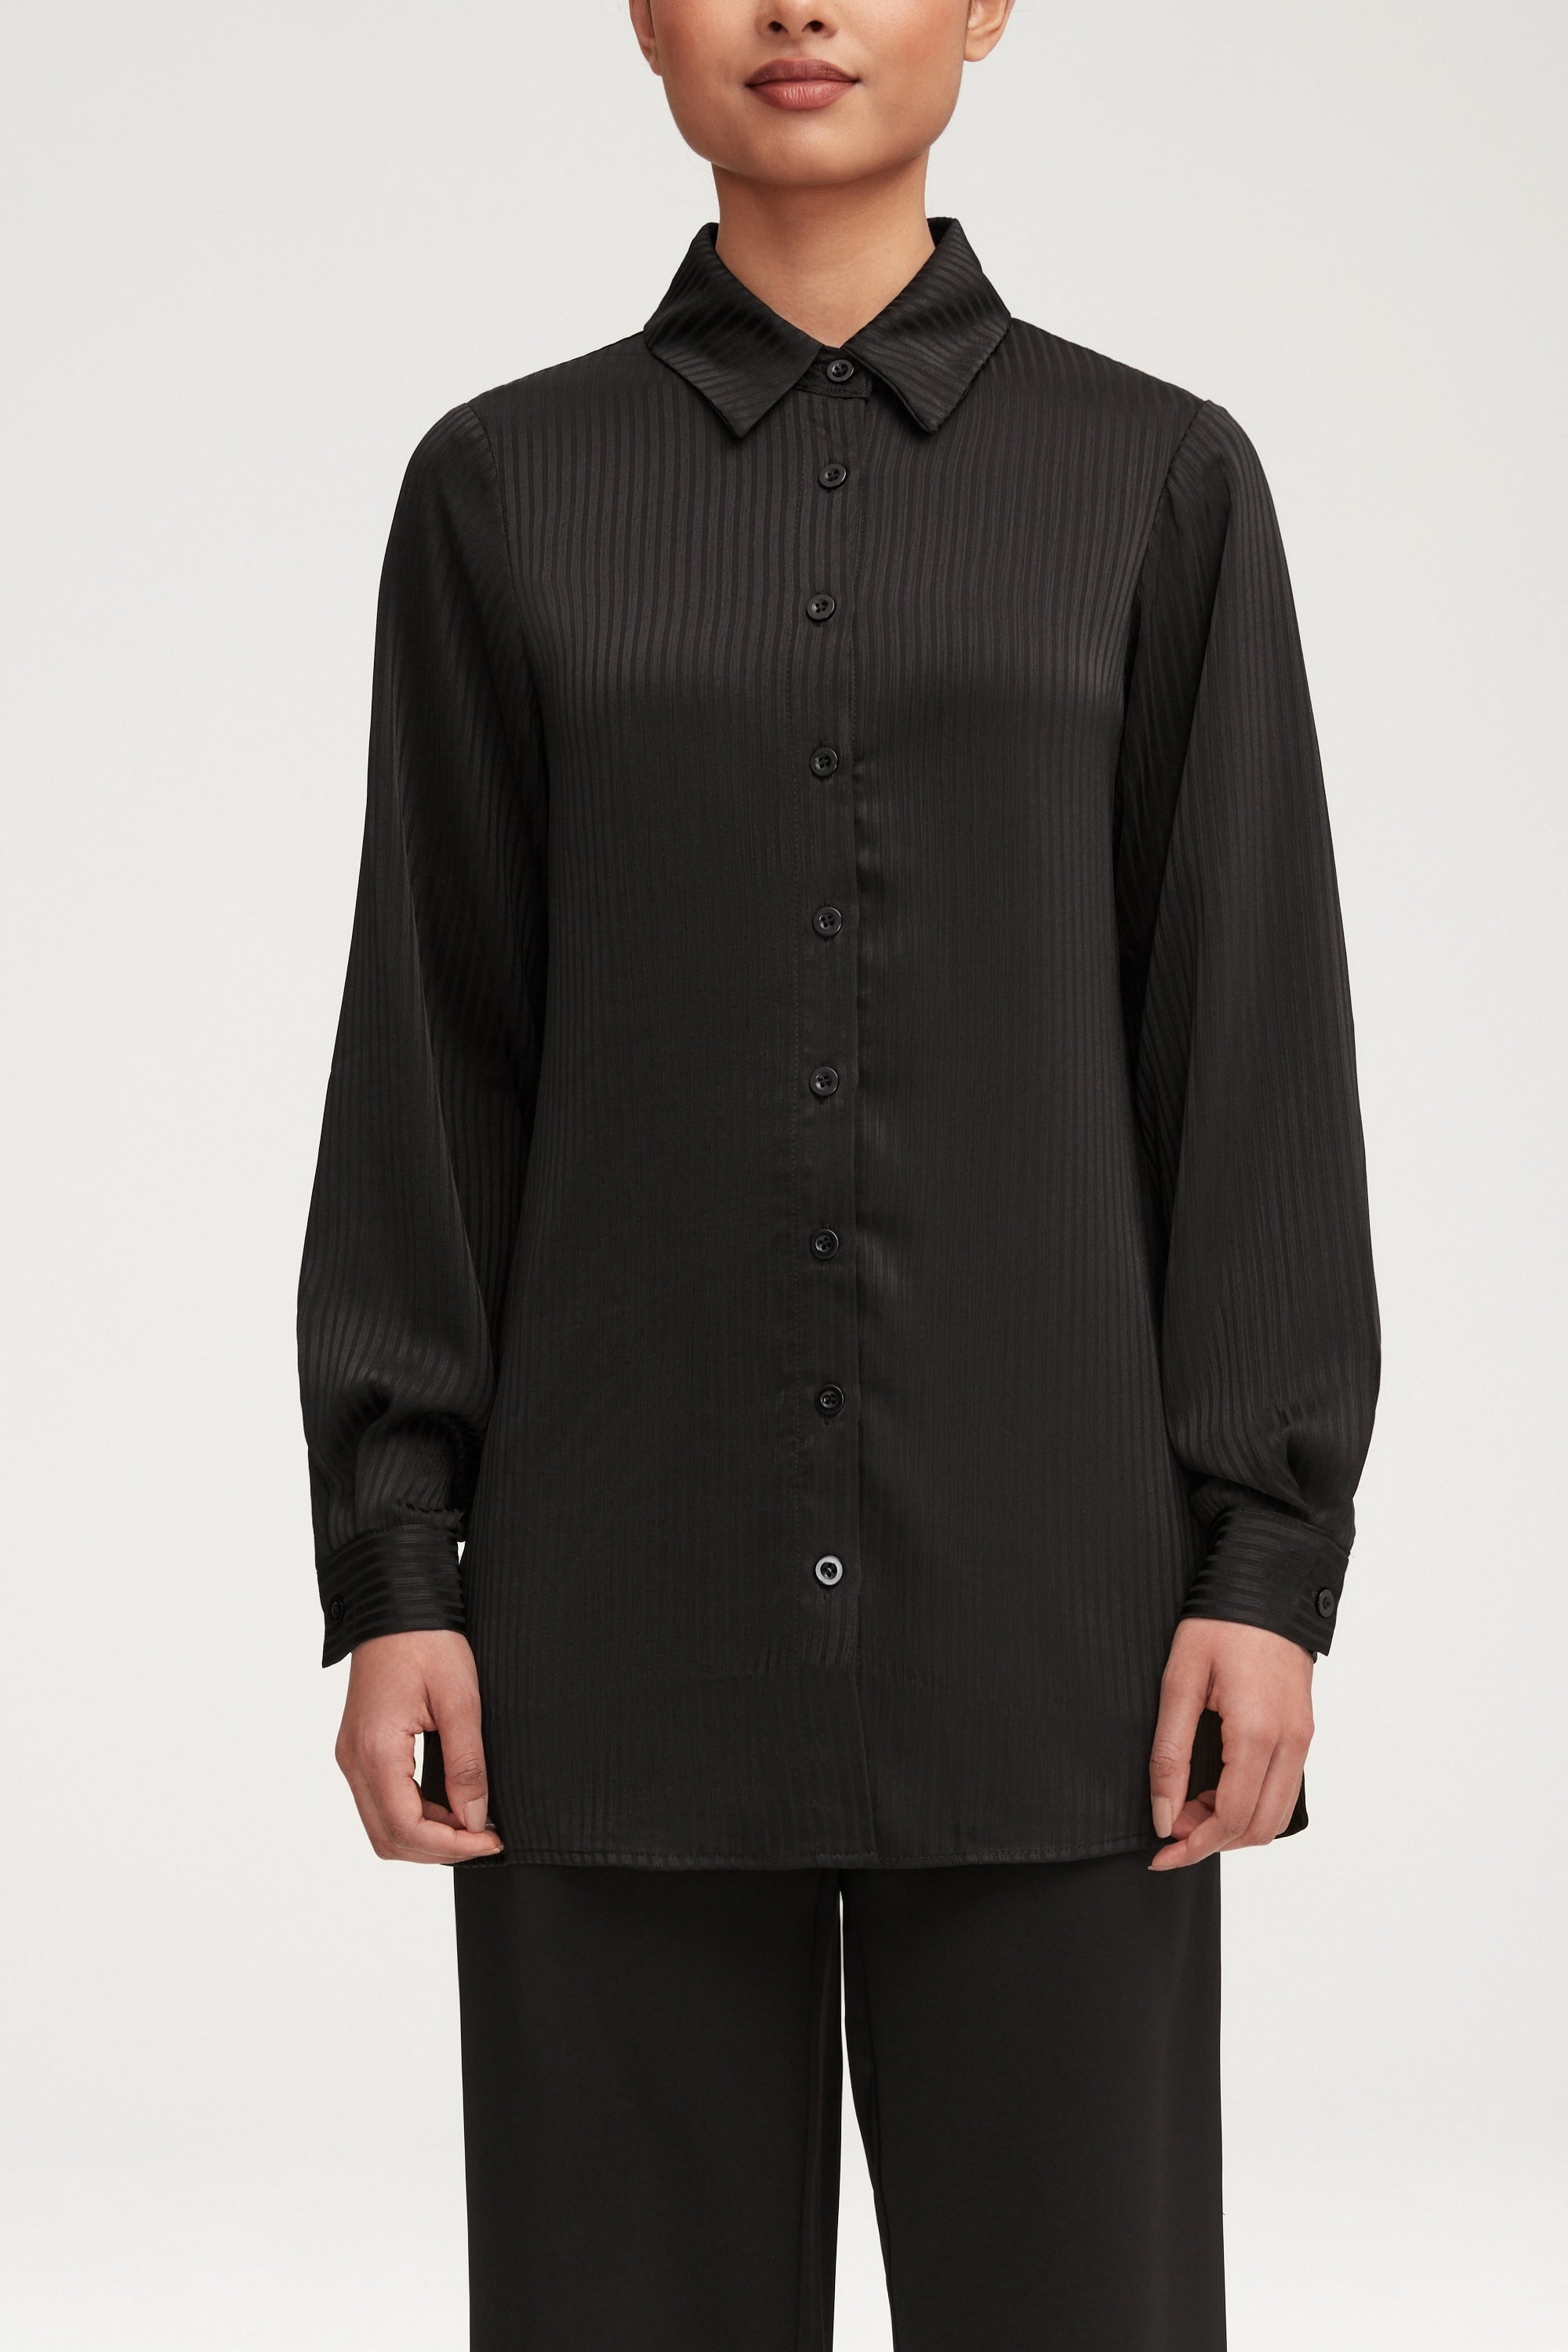 Jaserah Button Down Top - Black Clothing Veiled 